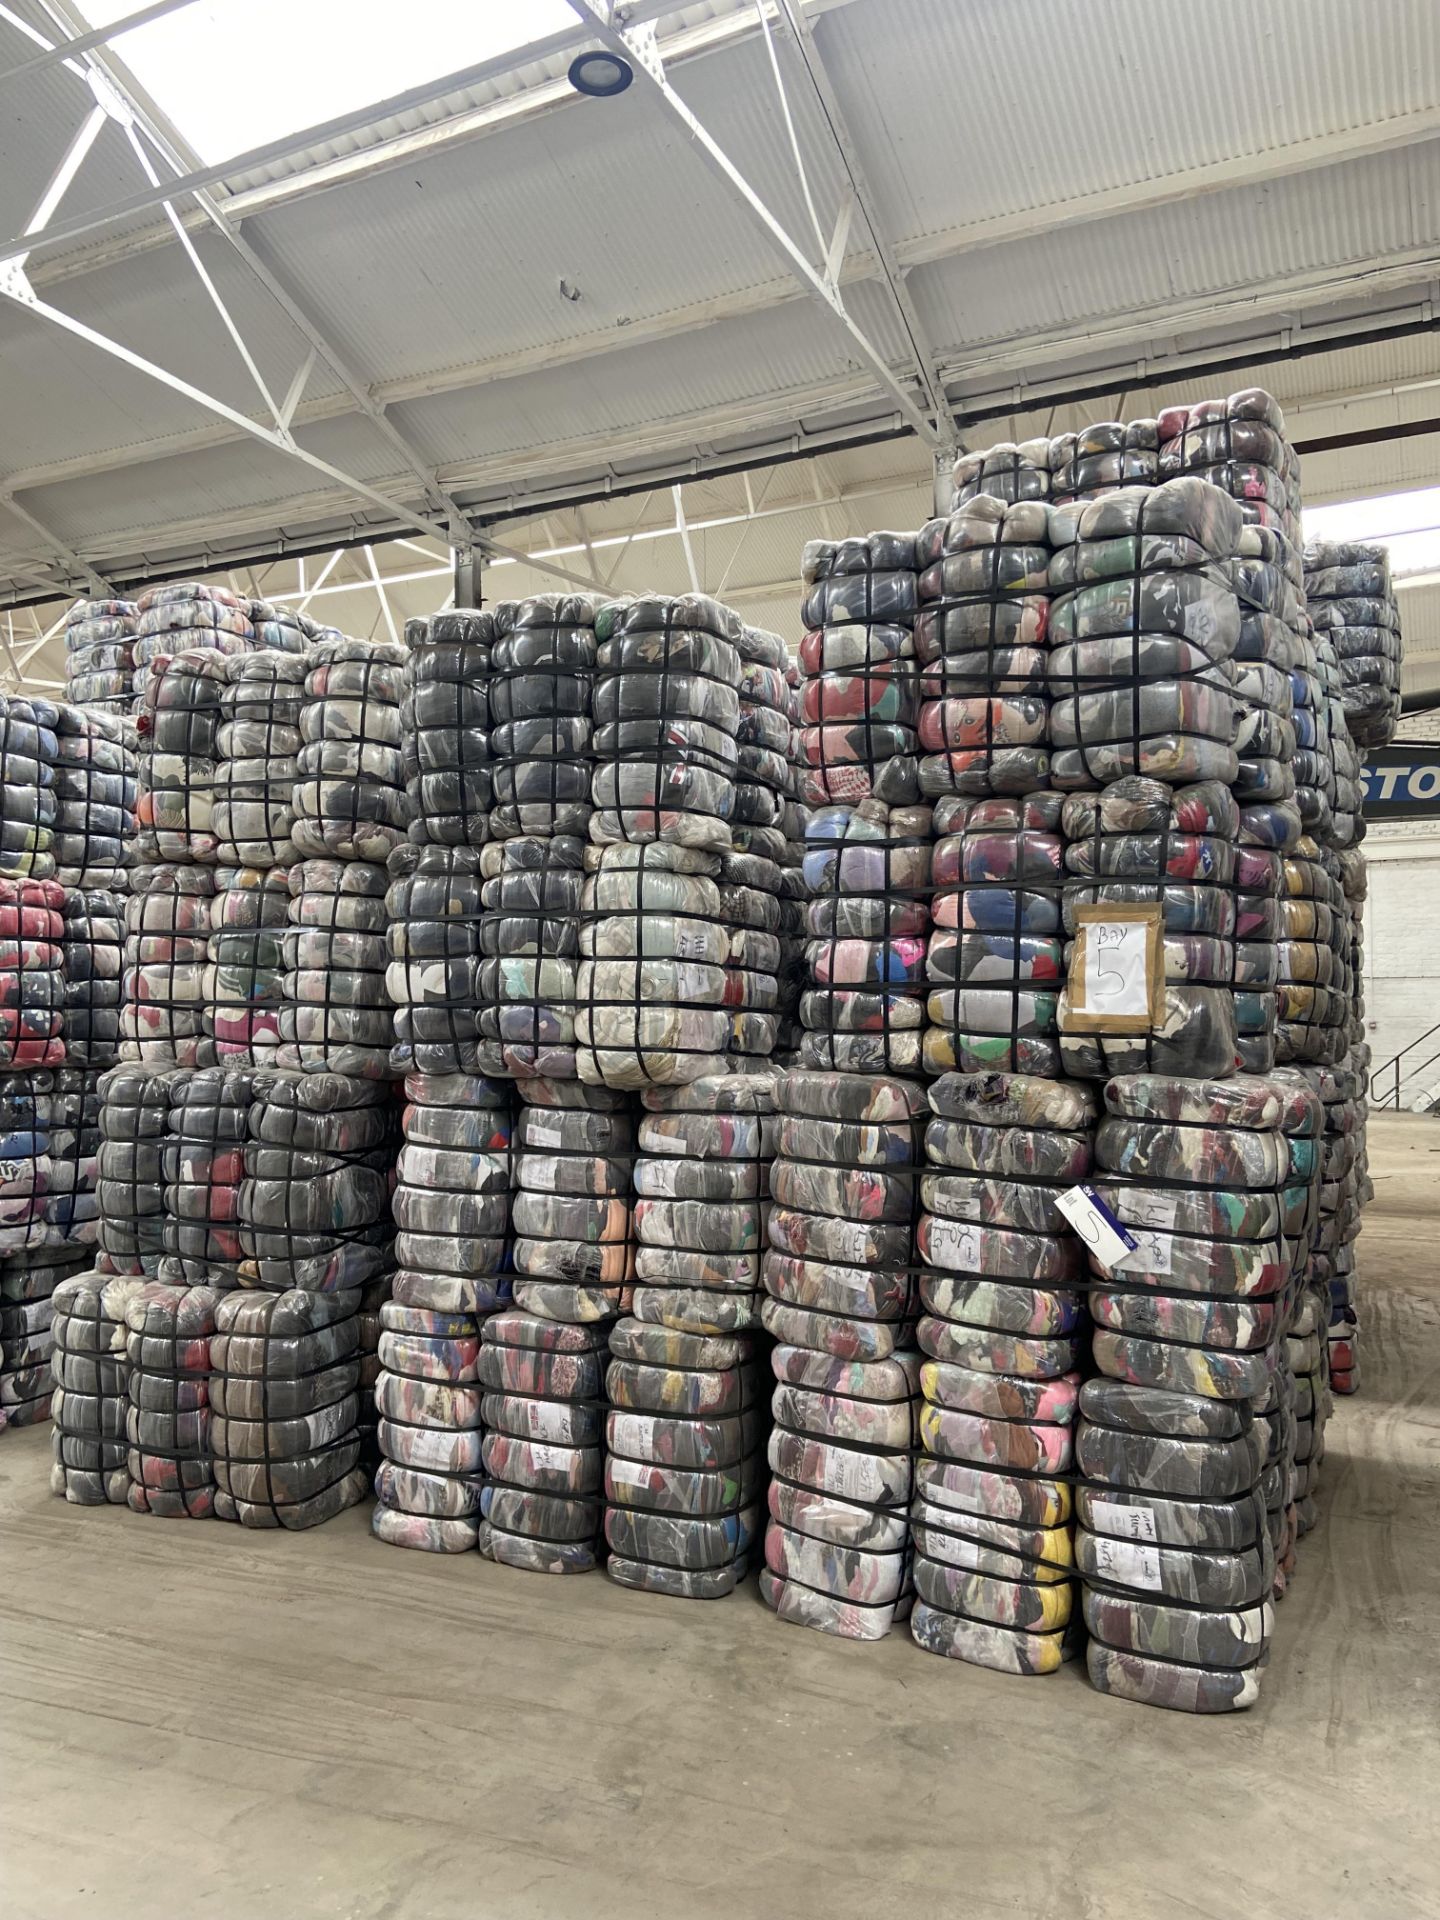 APPROX 210 BALES (9450KG) RECYCLABLE WASTE TEXTILES, understood to comprise: One bale x 45kg Adult